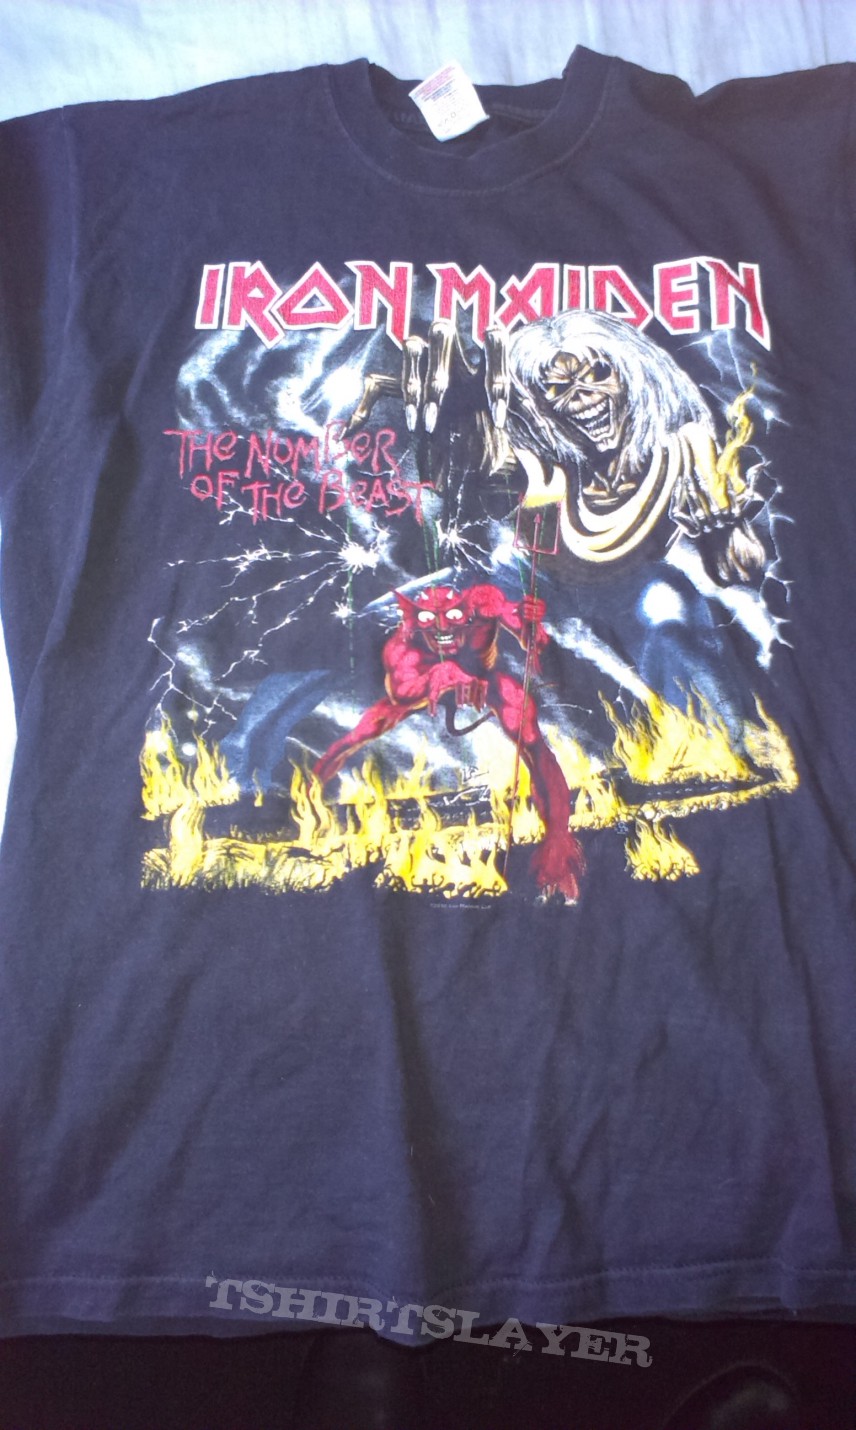 Iron Maiden Number of the Beast shirt for trade/sale